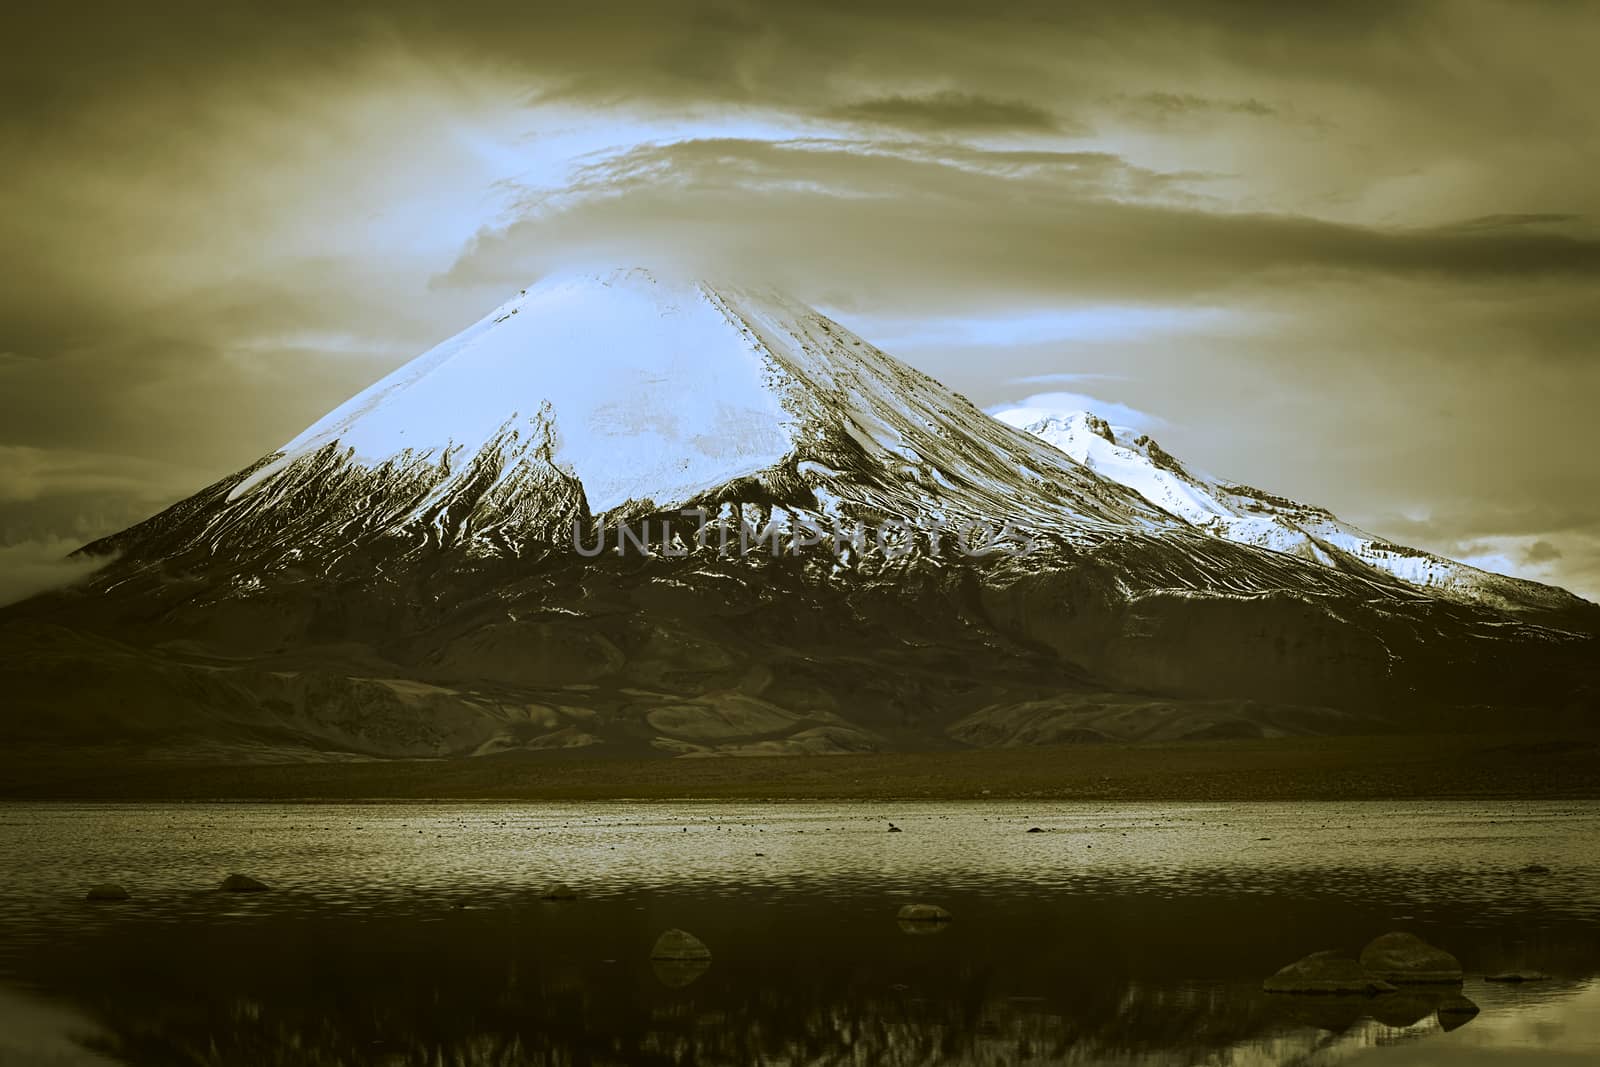 Parinacota stratovolcano (6348 meters) and Chungara Lake on the border of Chile and Bolivia on the way from La Paz to Arica. Parinacota is part of the Payachata volcanic group in Northern Chile. (Dual Toned Image)